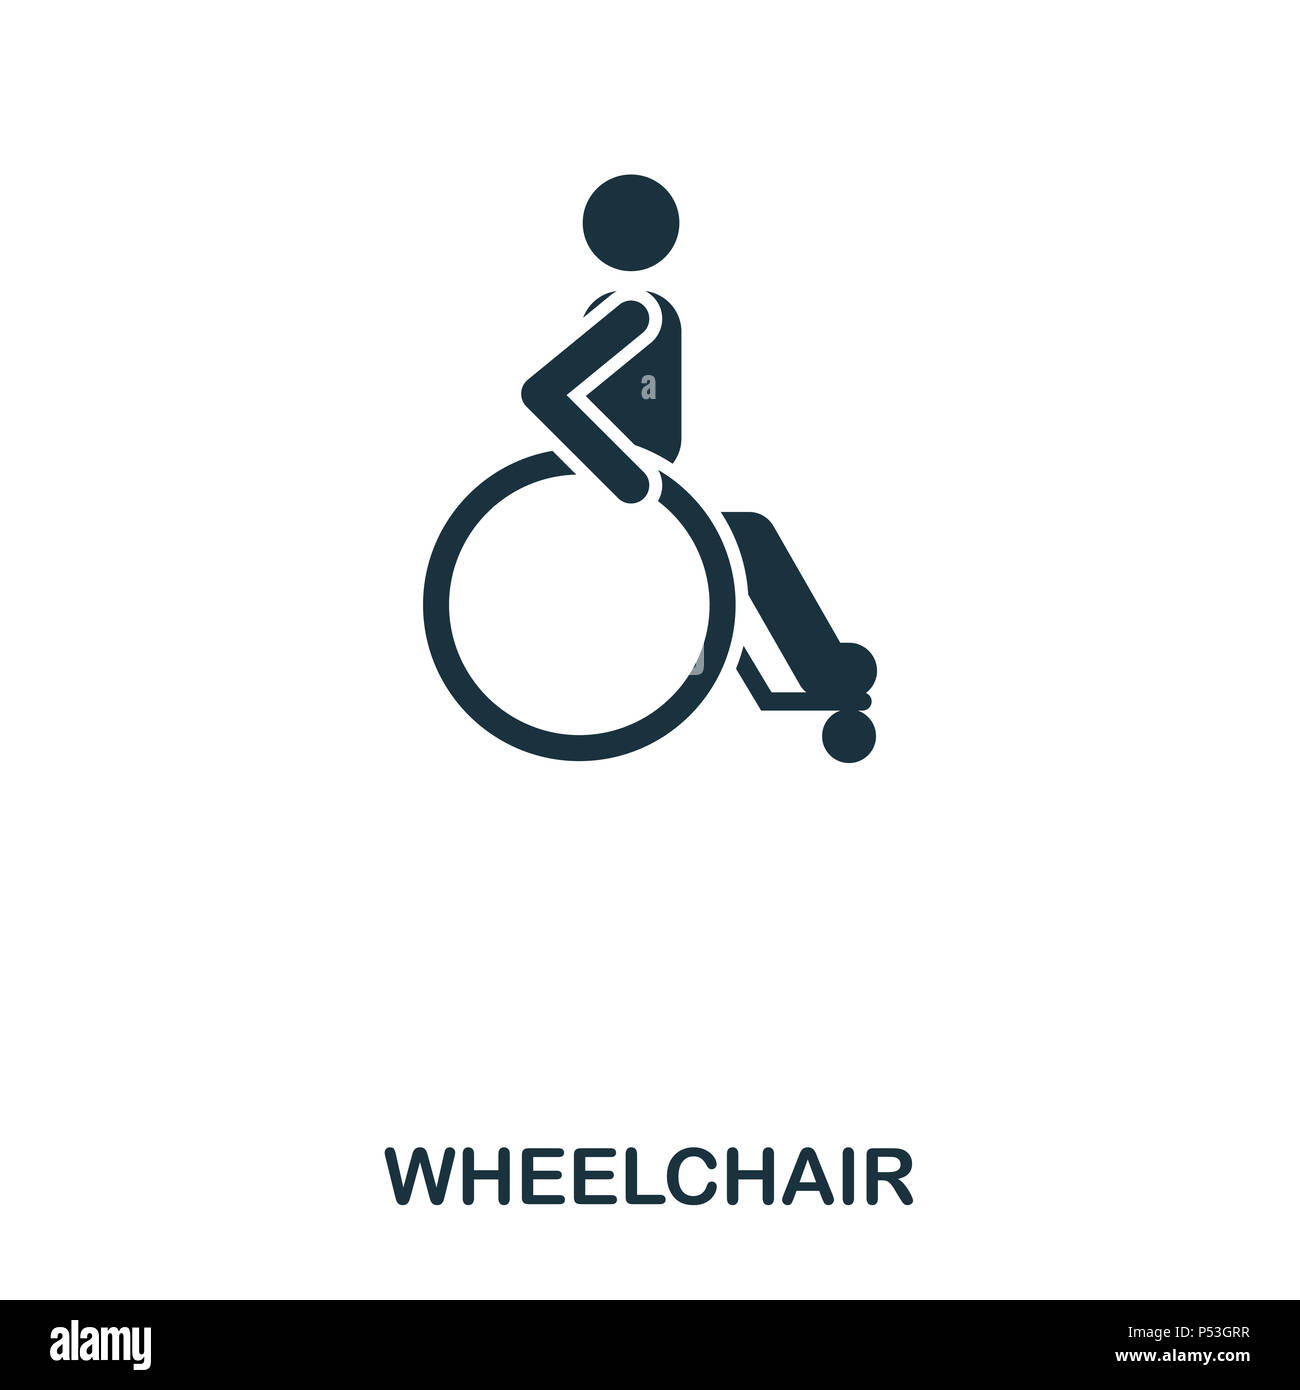 Wheelchair icon. Line style icon design. UI. Illustration of wheelchair icon. Pictogram isolated on white. Ready to use in web design, apps, software, print. Stock Photo